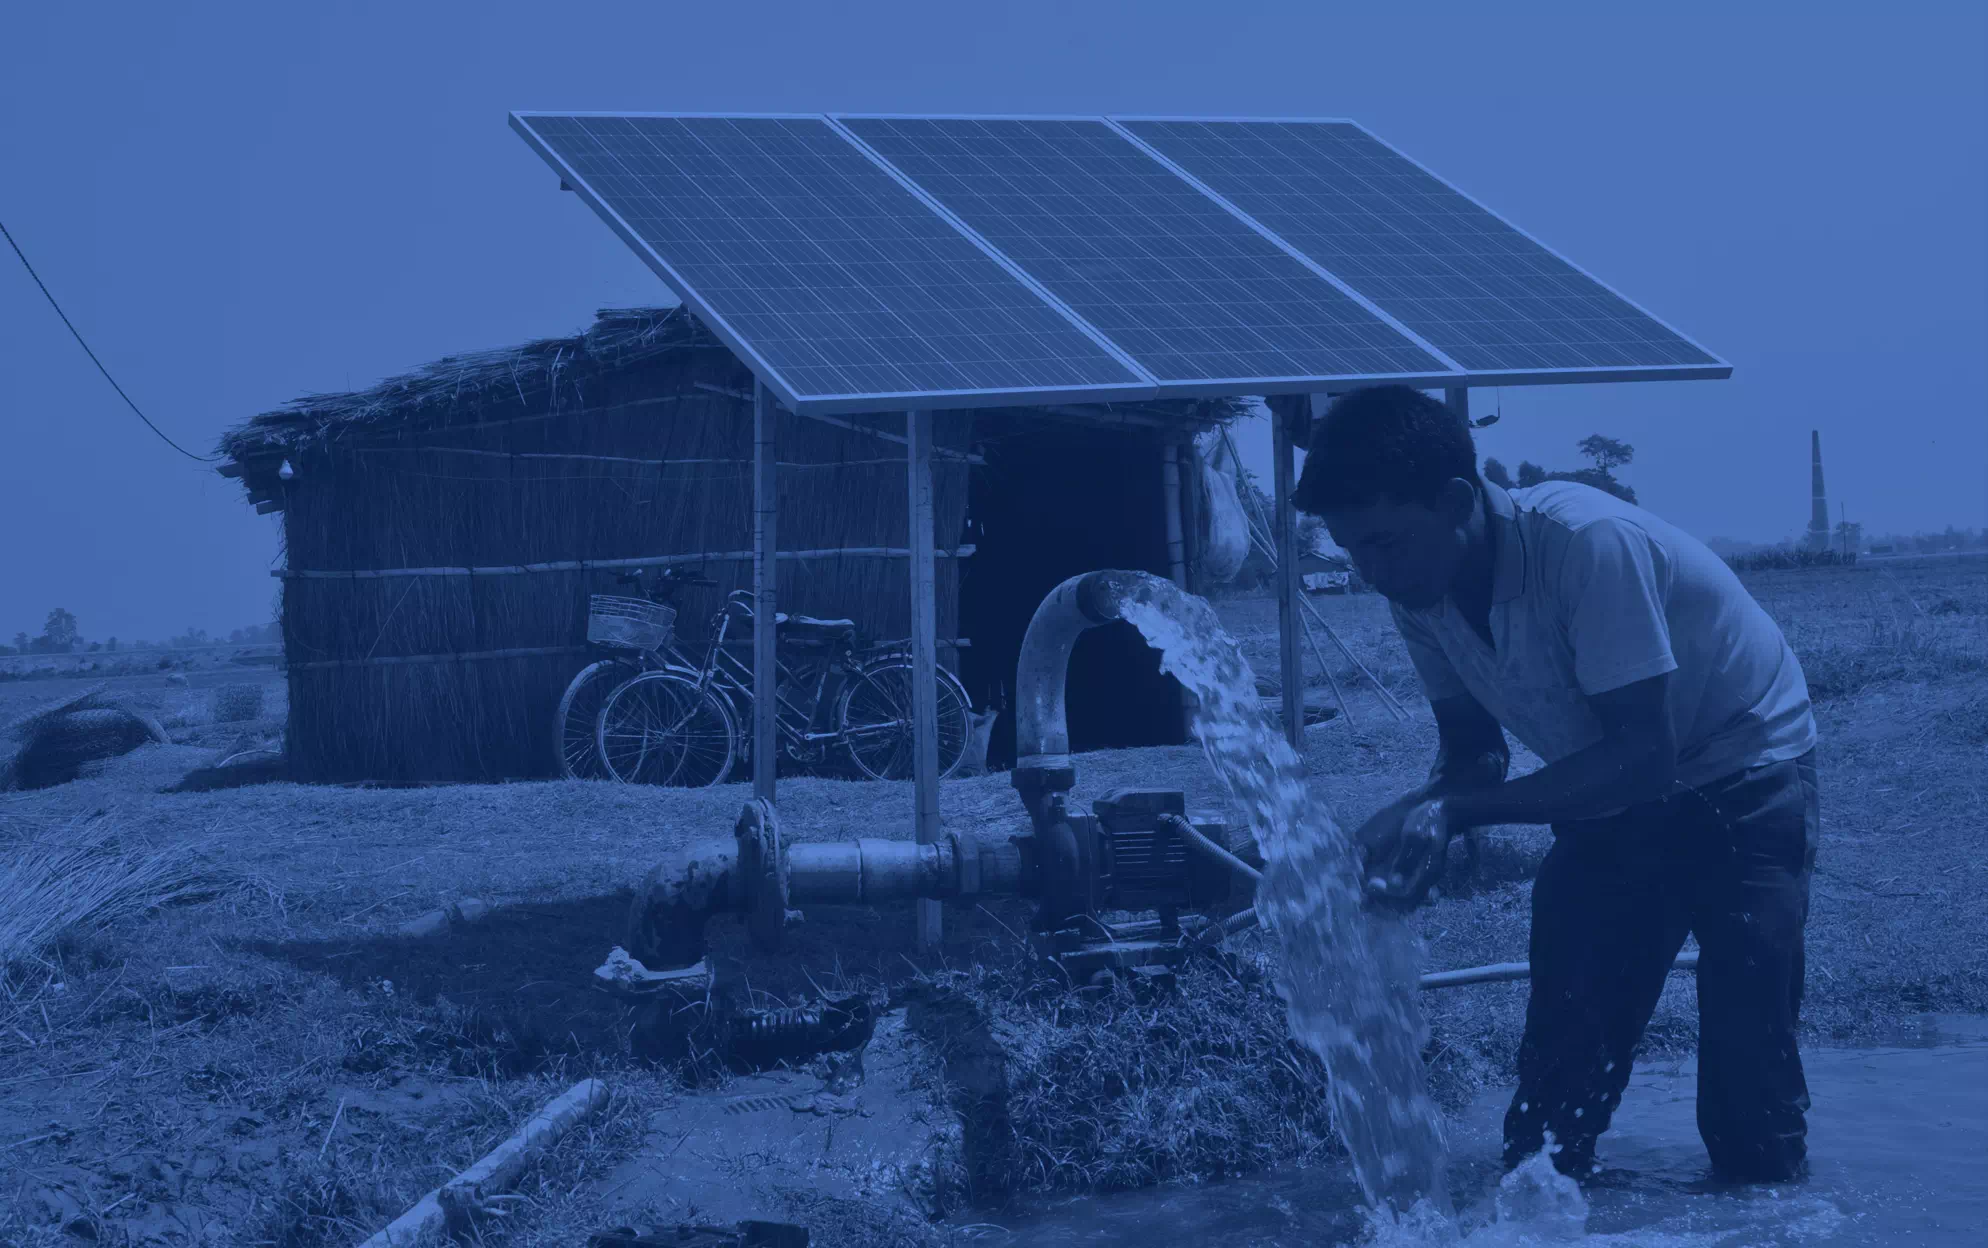 An image of a nepalese farmer using a solar powered water pump